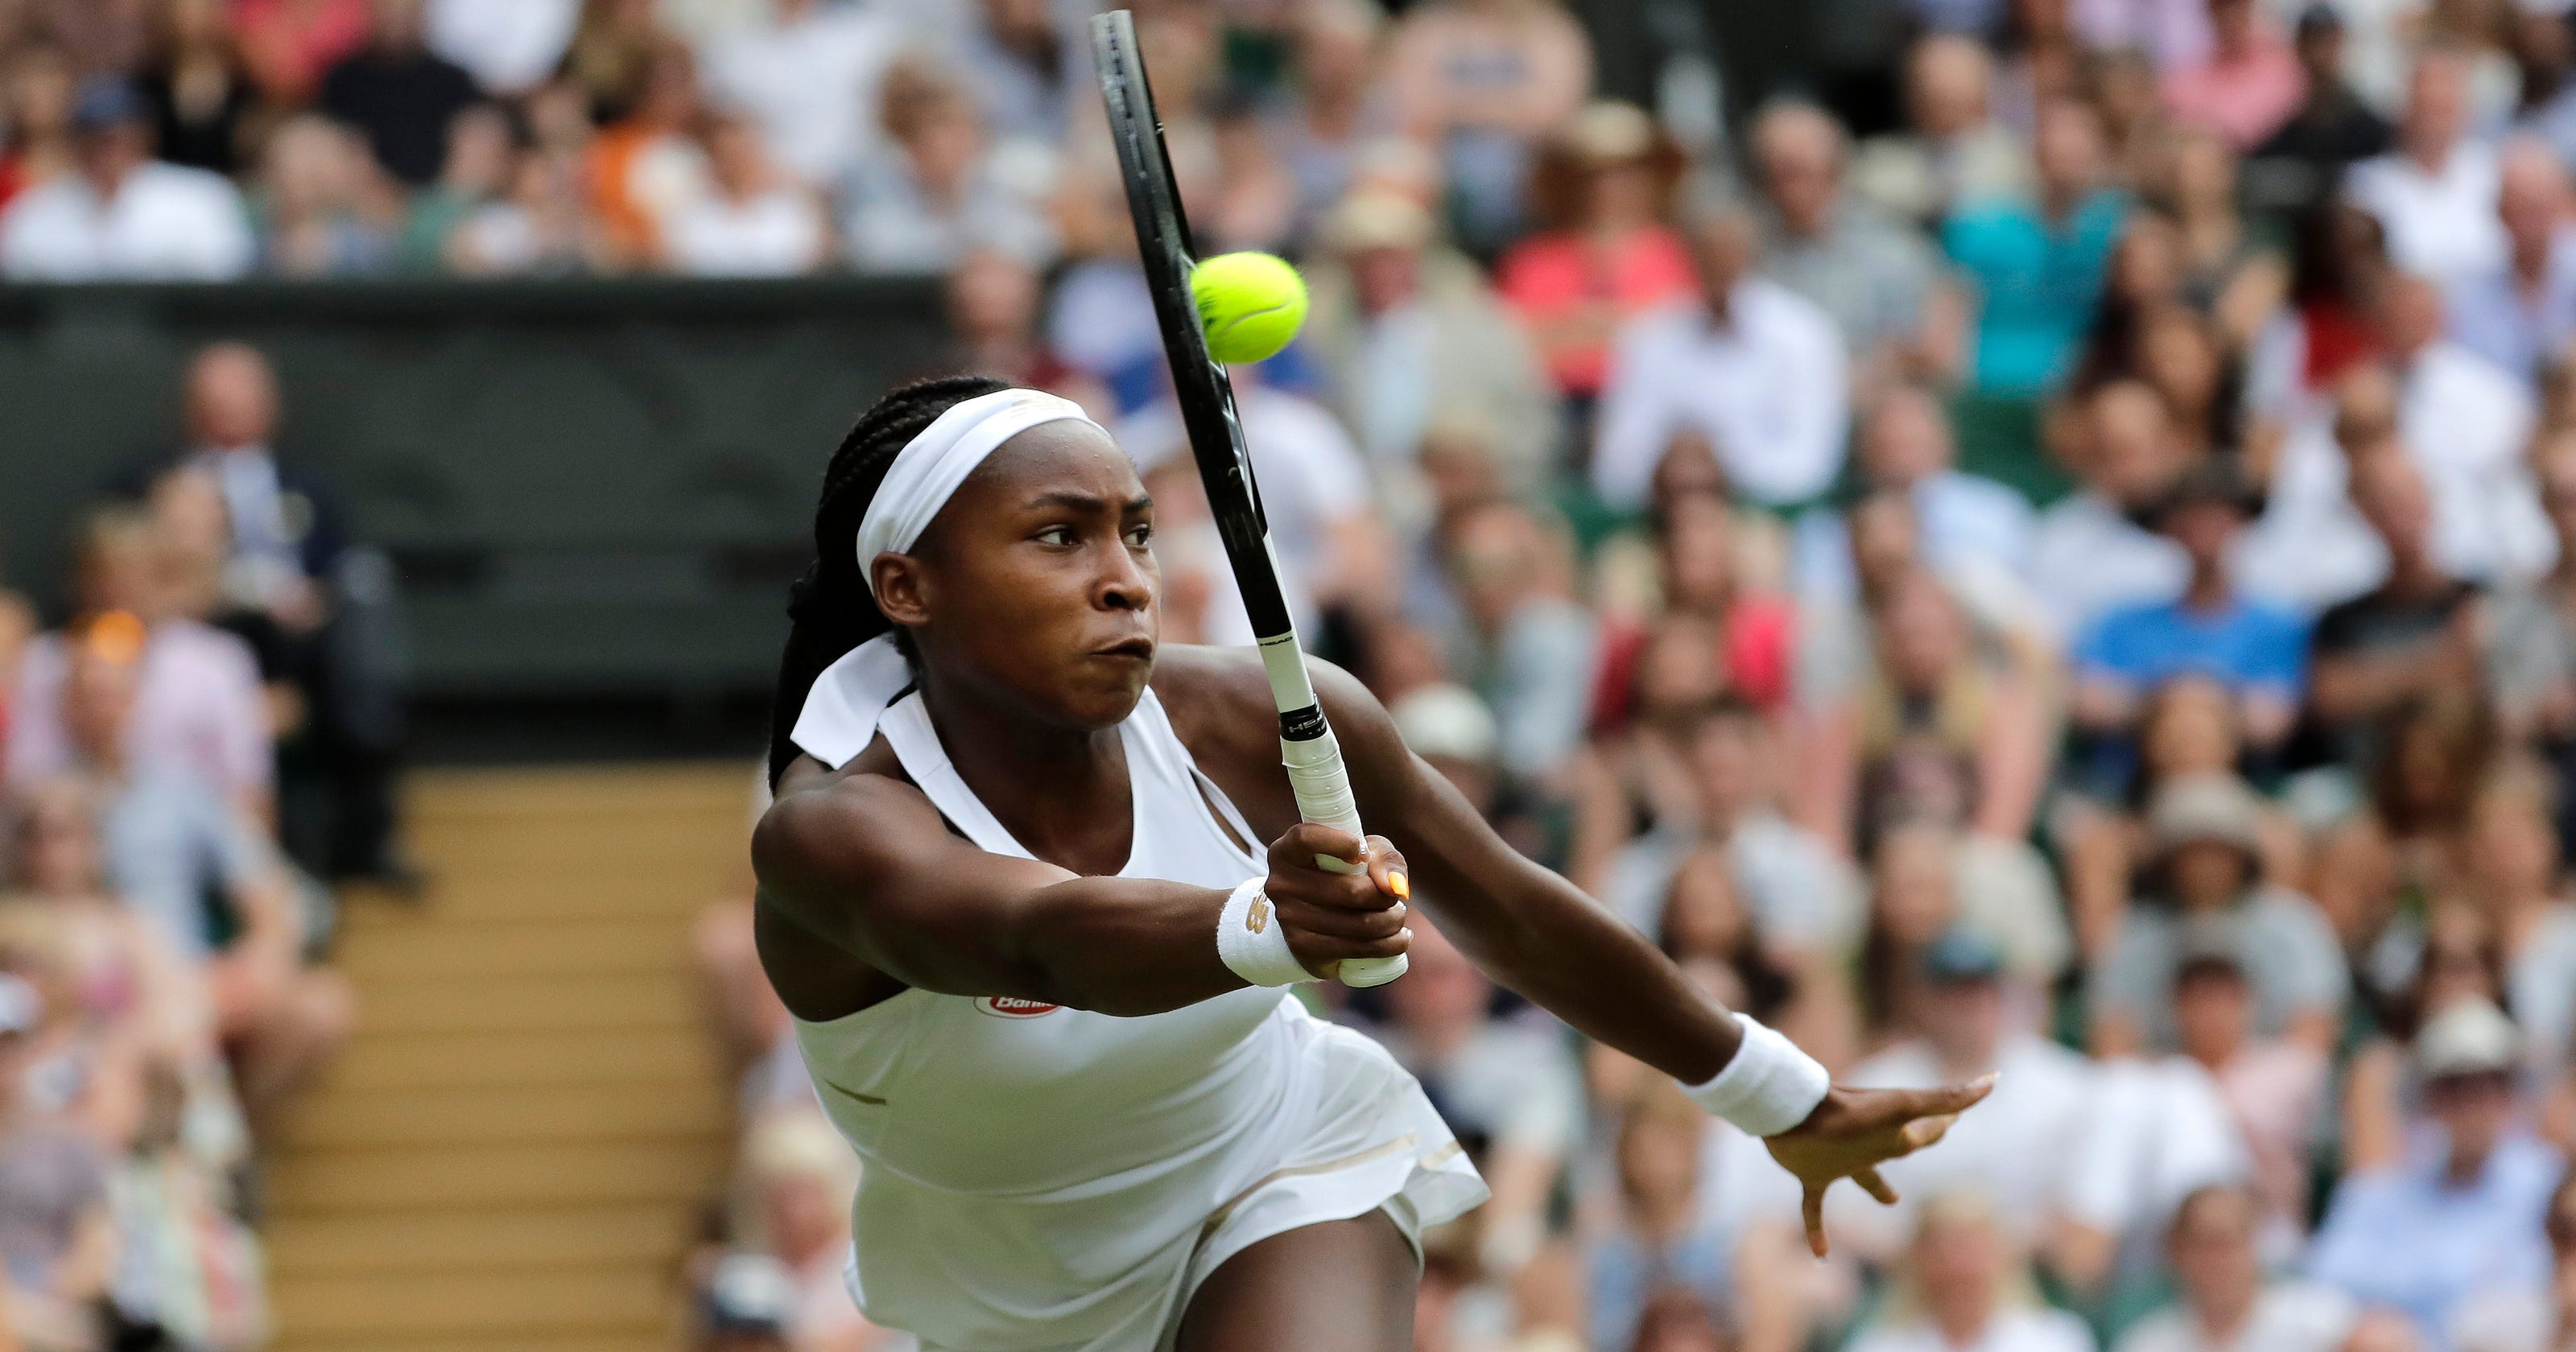 Coco Gauff enthralls tennis fans with win at Citi Open in Washington